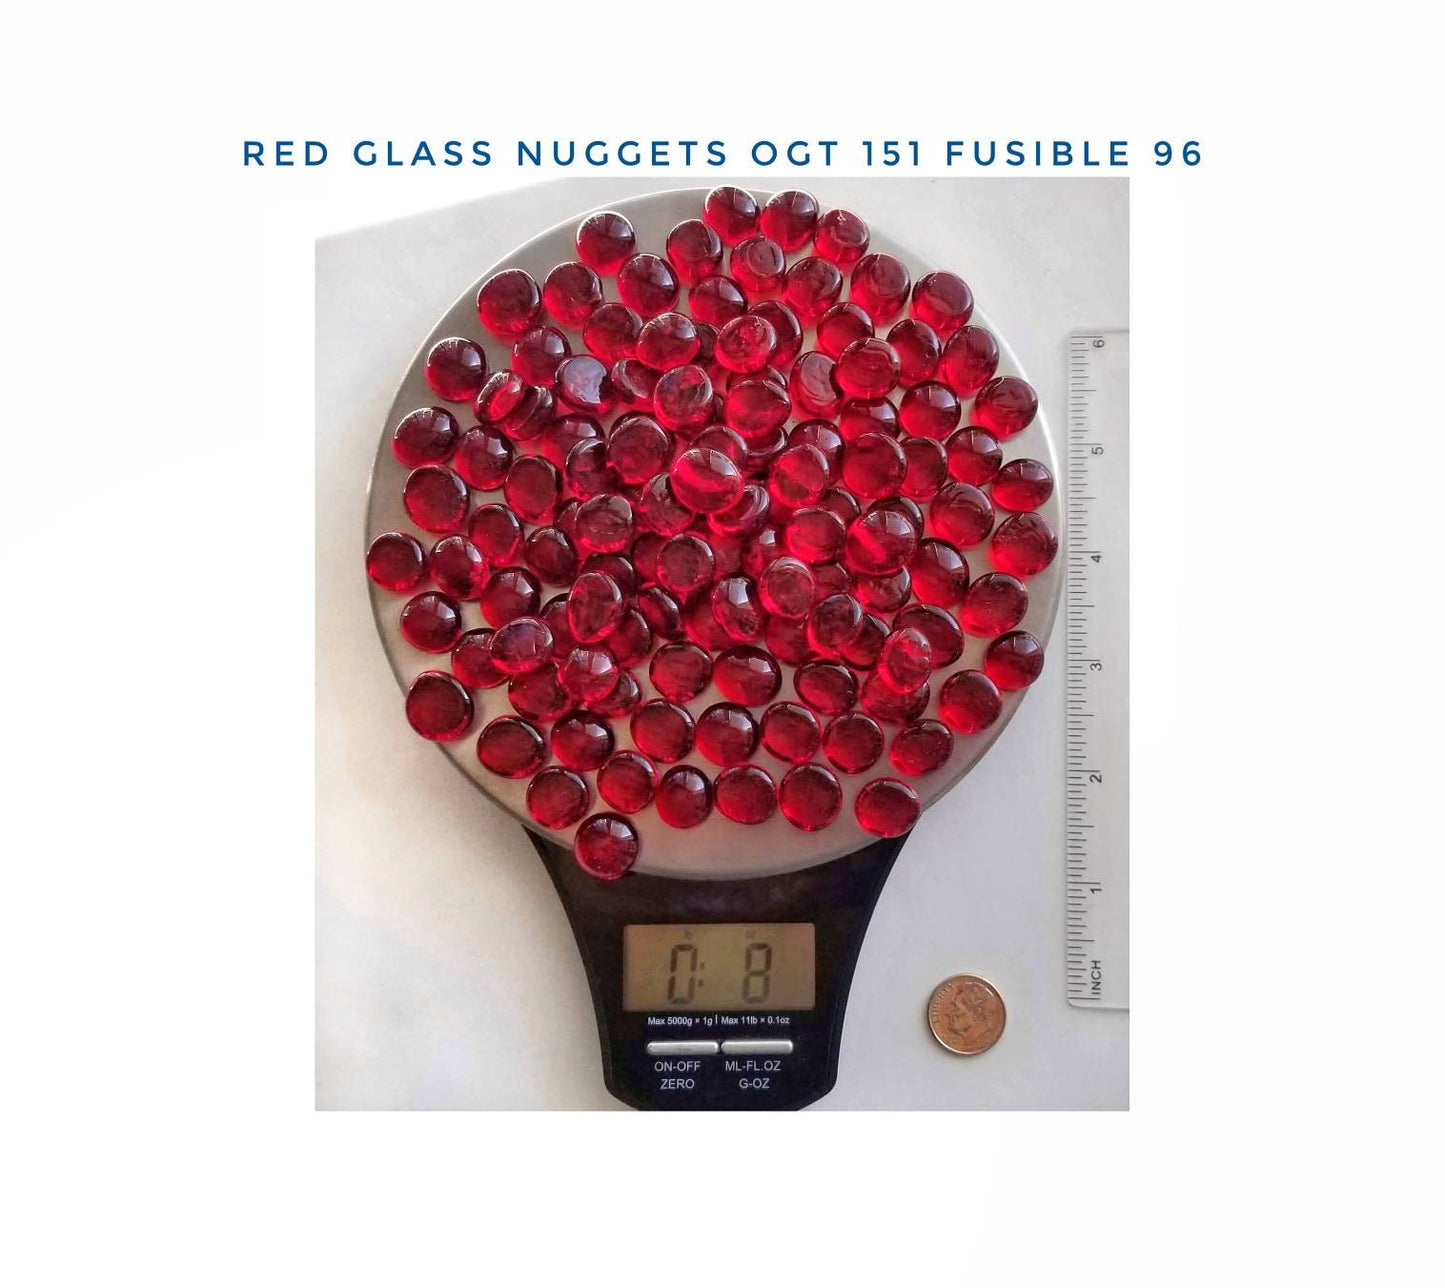 Small Red Glass Nuggets for Stained Glass. 96 coe Fusible. Steppingstones, Mosaic. Jewelry Gems. Diy Holiday Craft Projects, Holly berry.